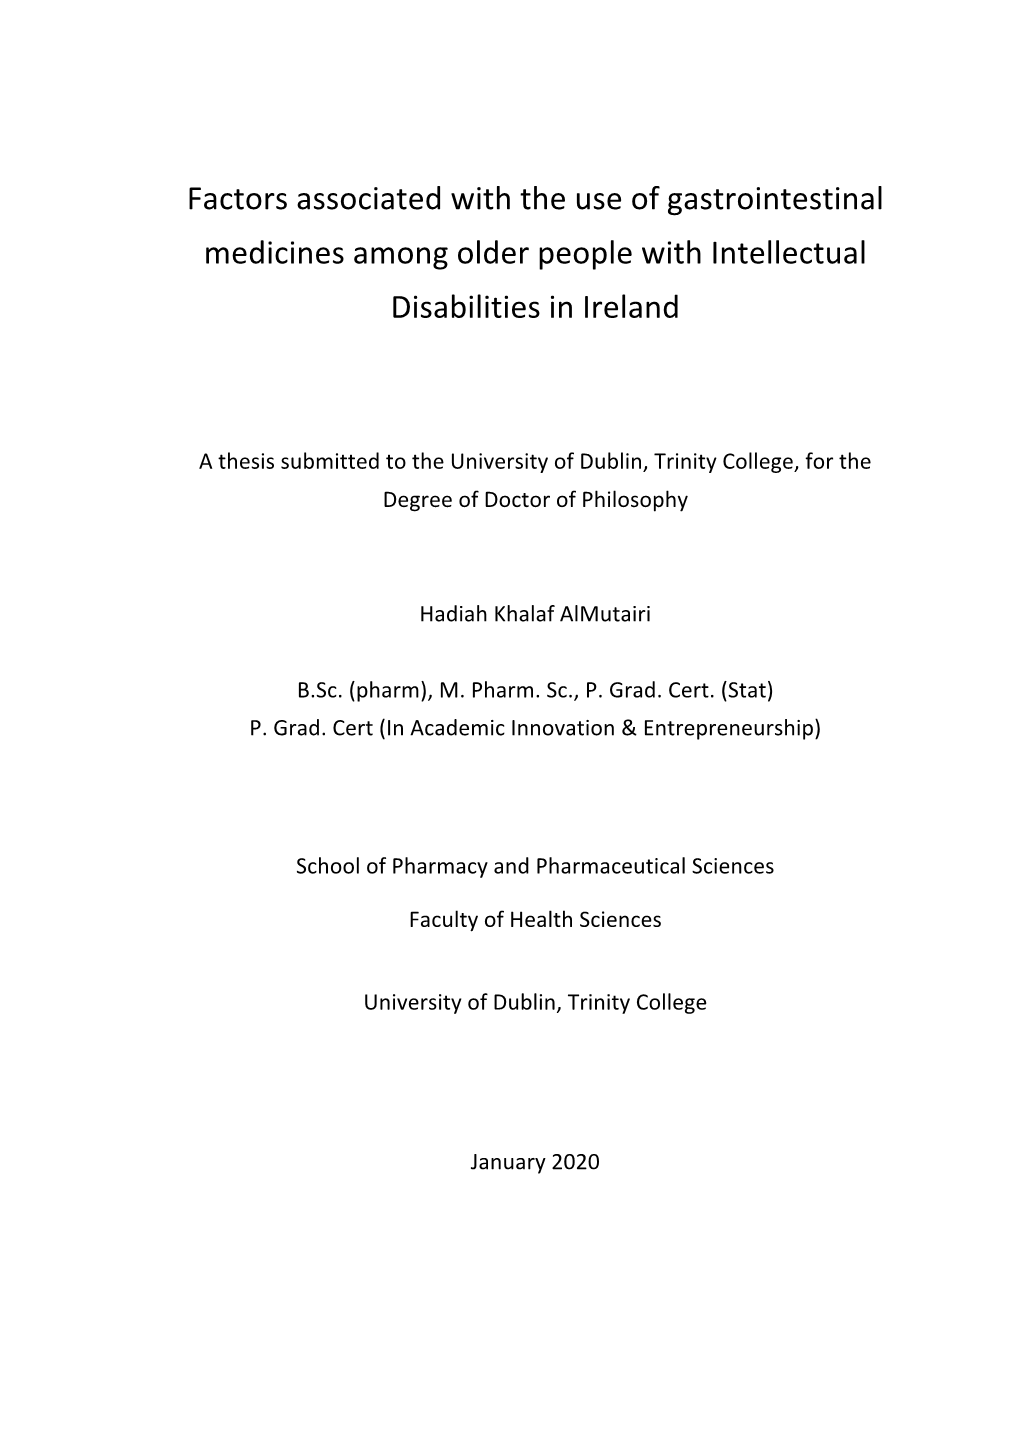 Factors Associated with the Use of Gastrointestinal Medicines Among Older People with Intellectual Disabilities in Ireland